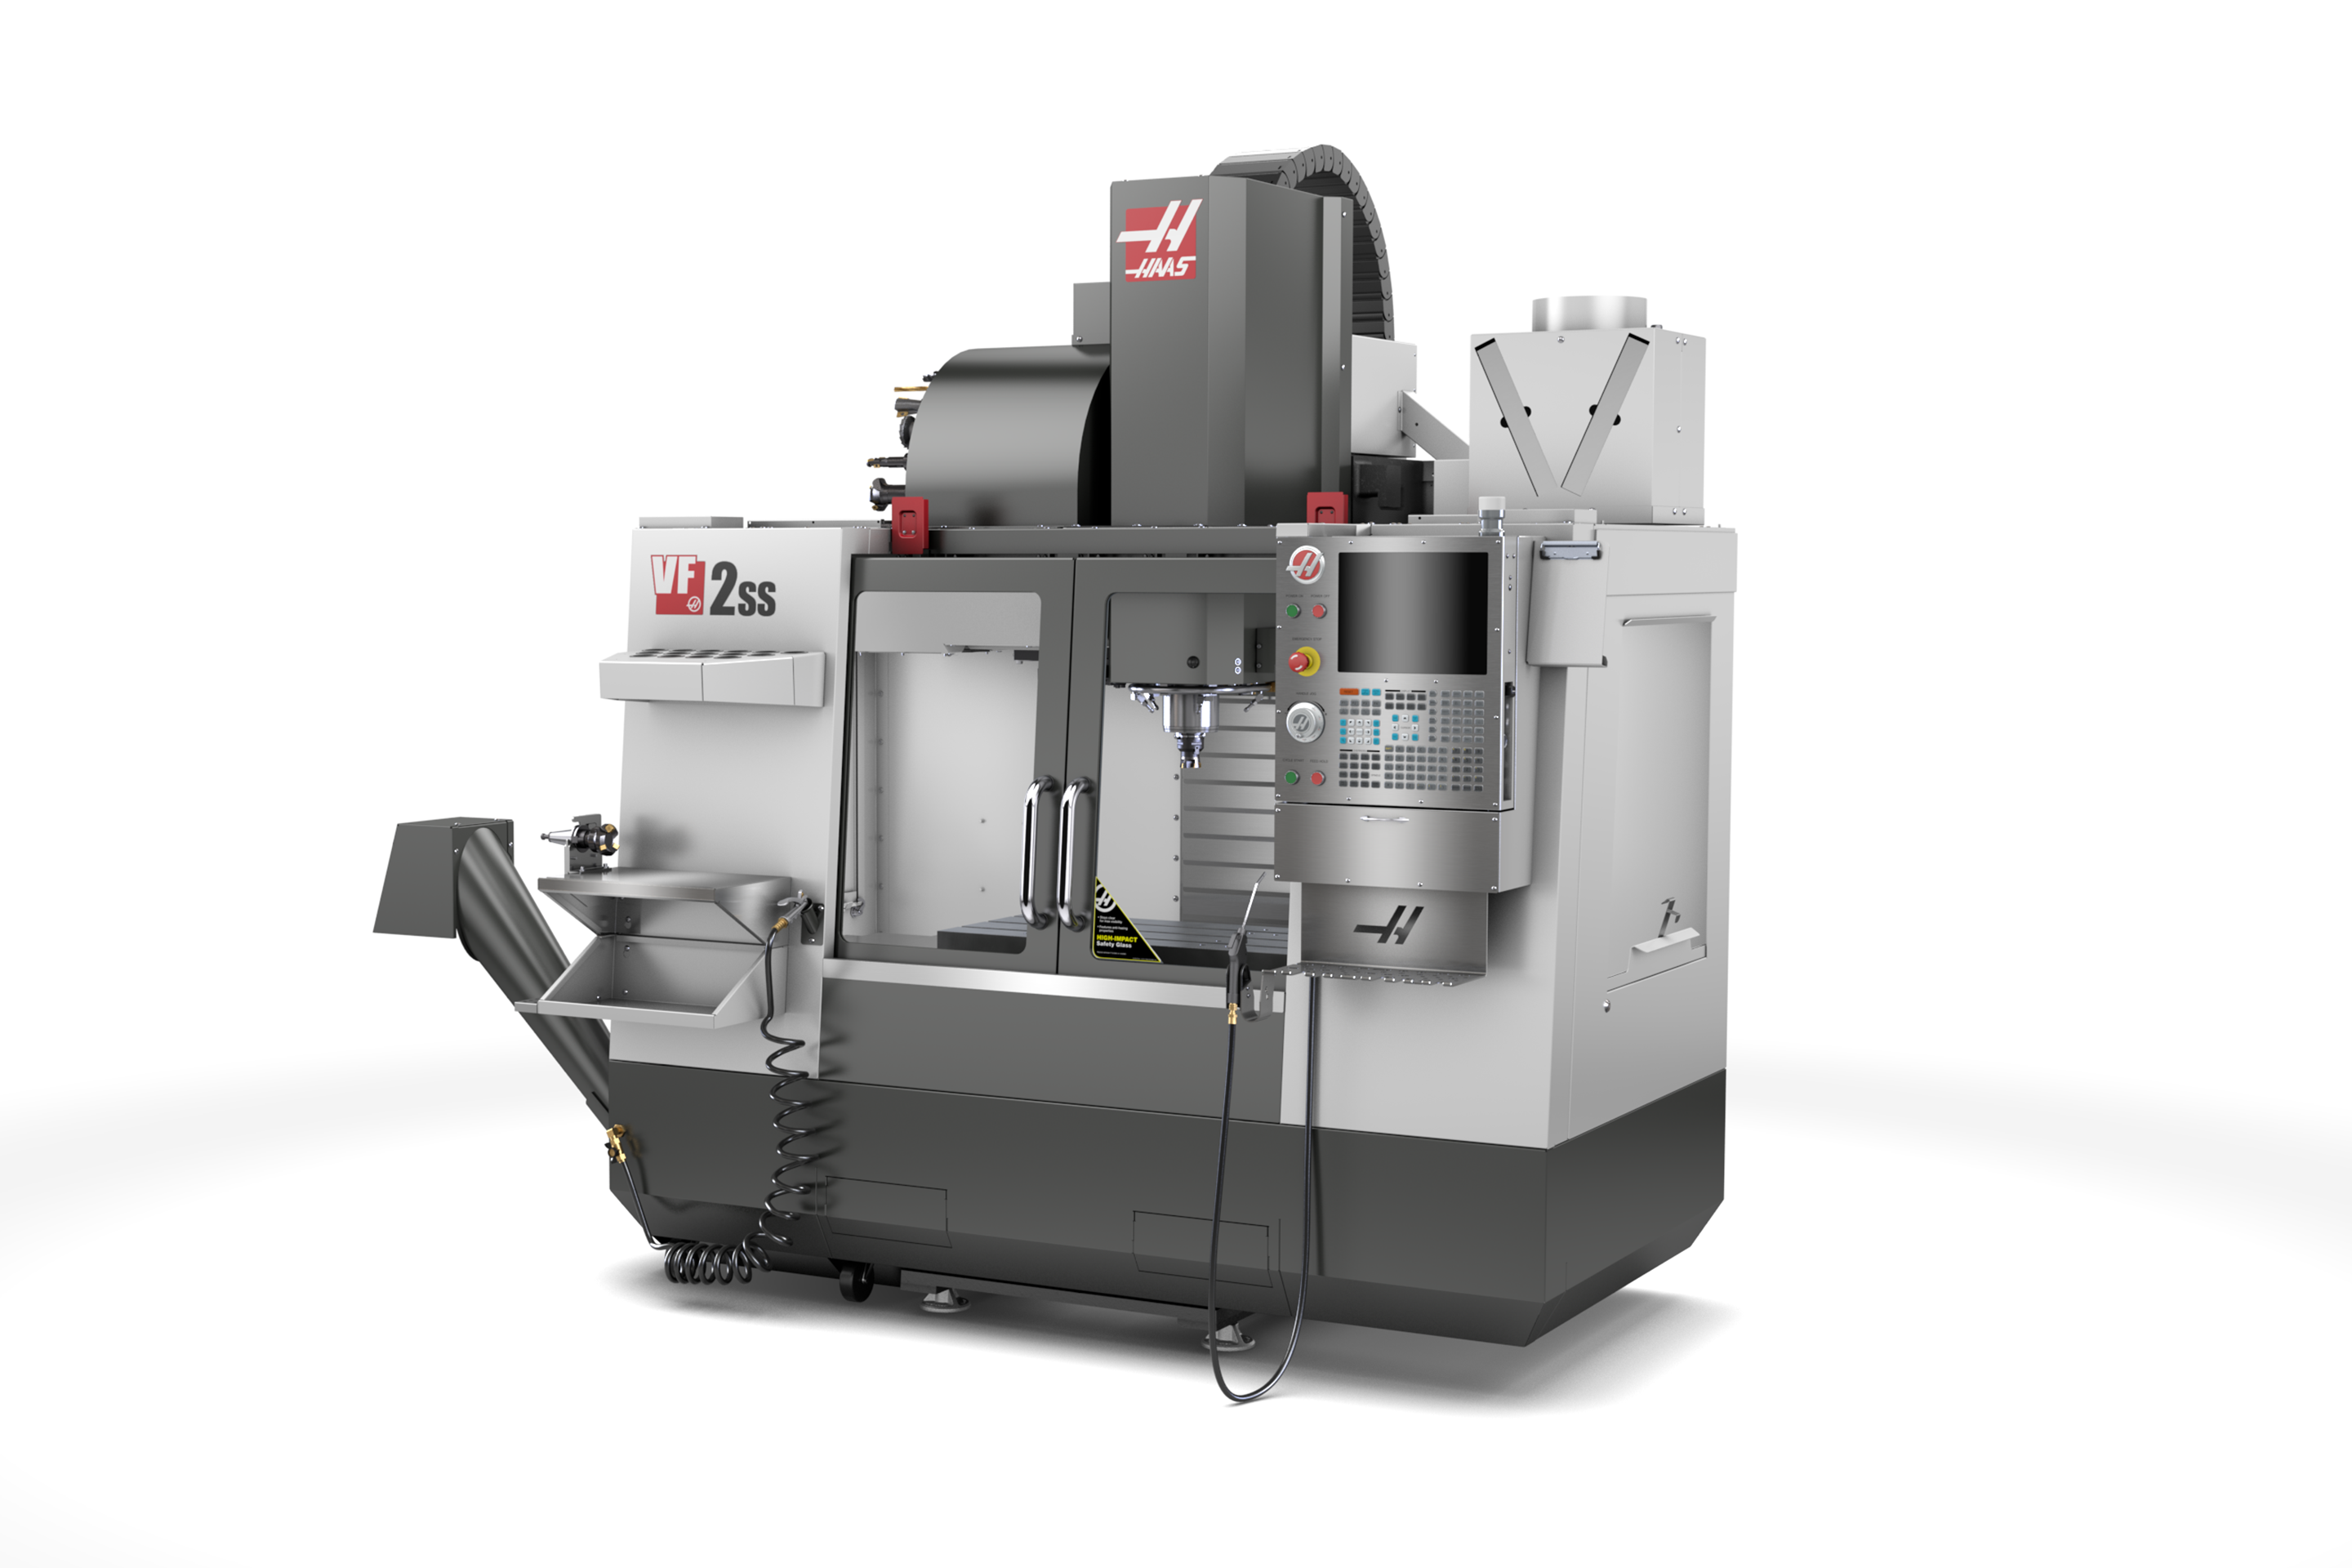 The Haas VF-2SS: A versatile and powerful machine perfect for any project.